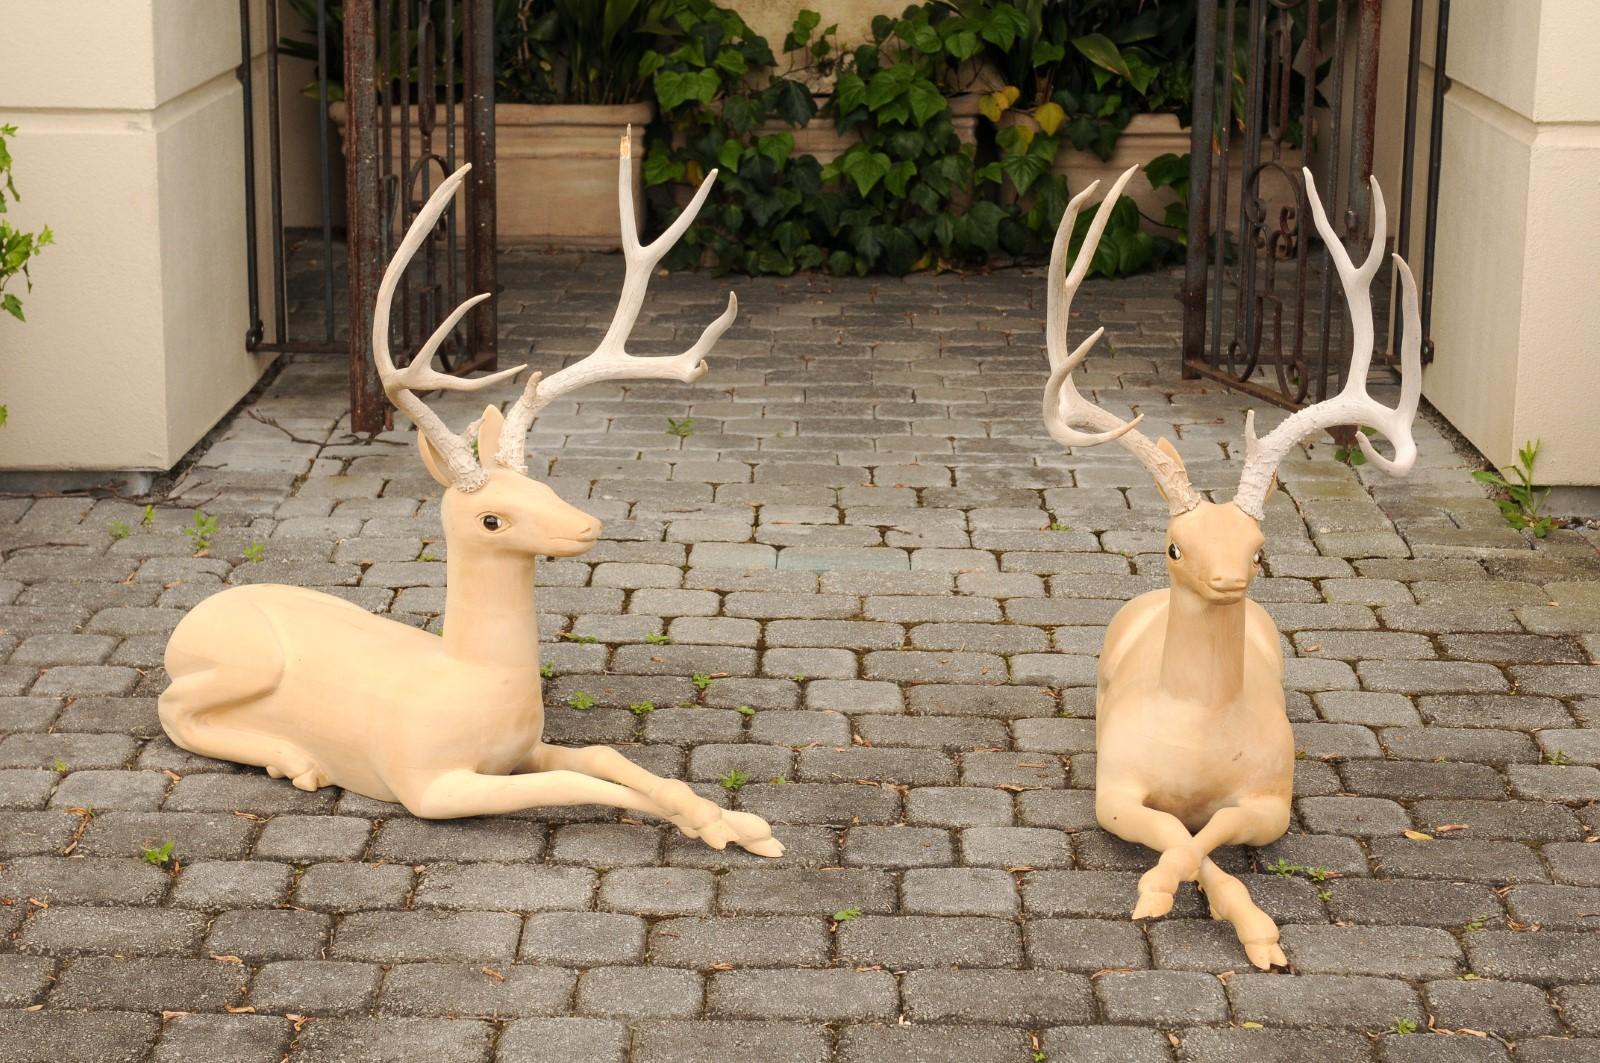 A pair of Italian wooden carved stag sculptures from the mid-20th century with large antlers. Born in Italy during the mid-century period, this charming pair of wooden sculptures depicts two stags carved in a minimalist style and topped with large